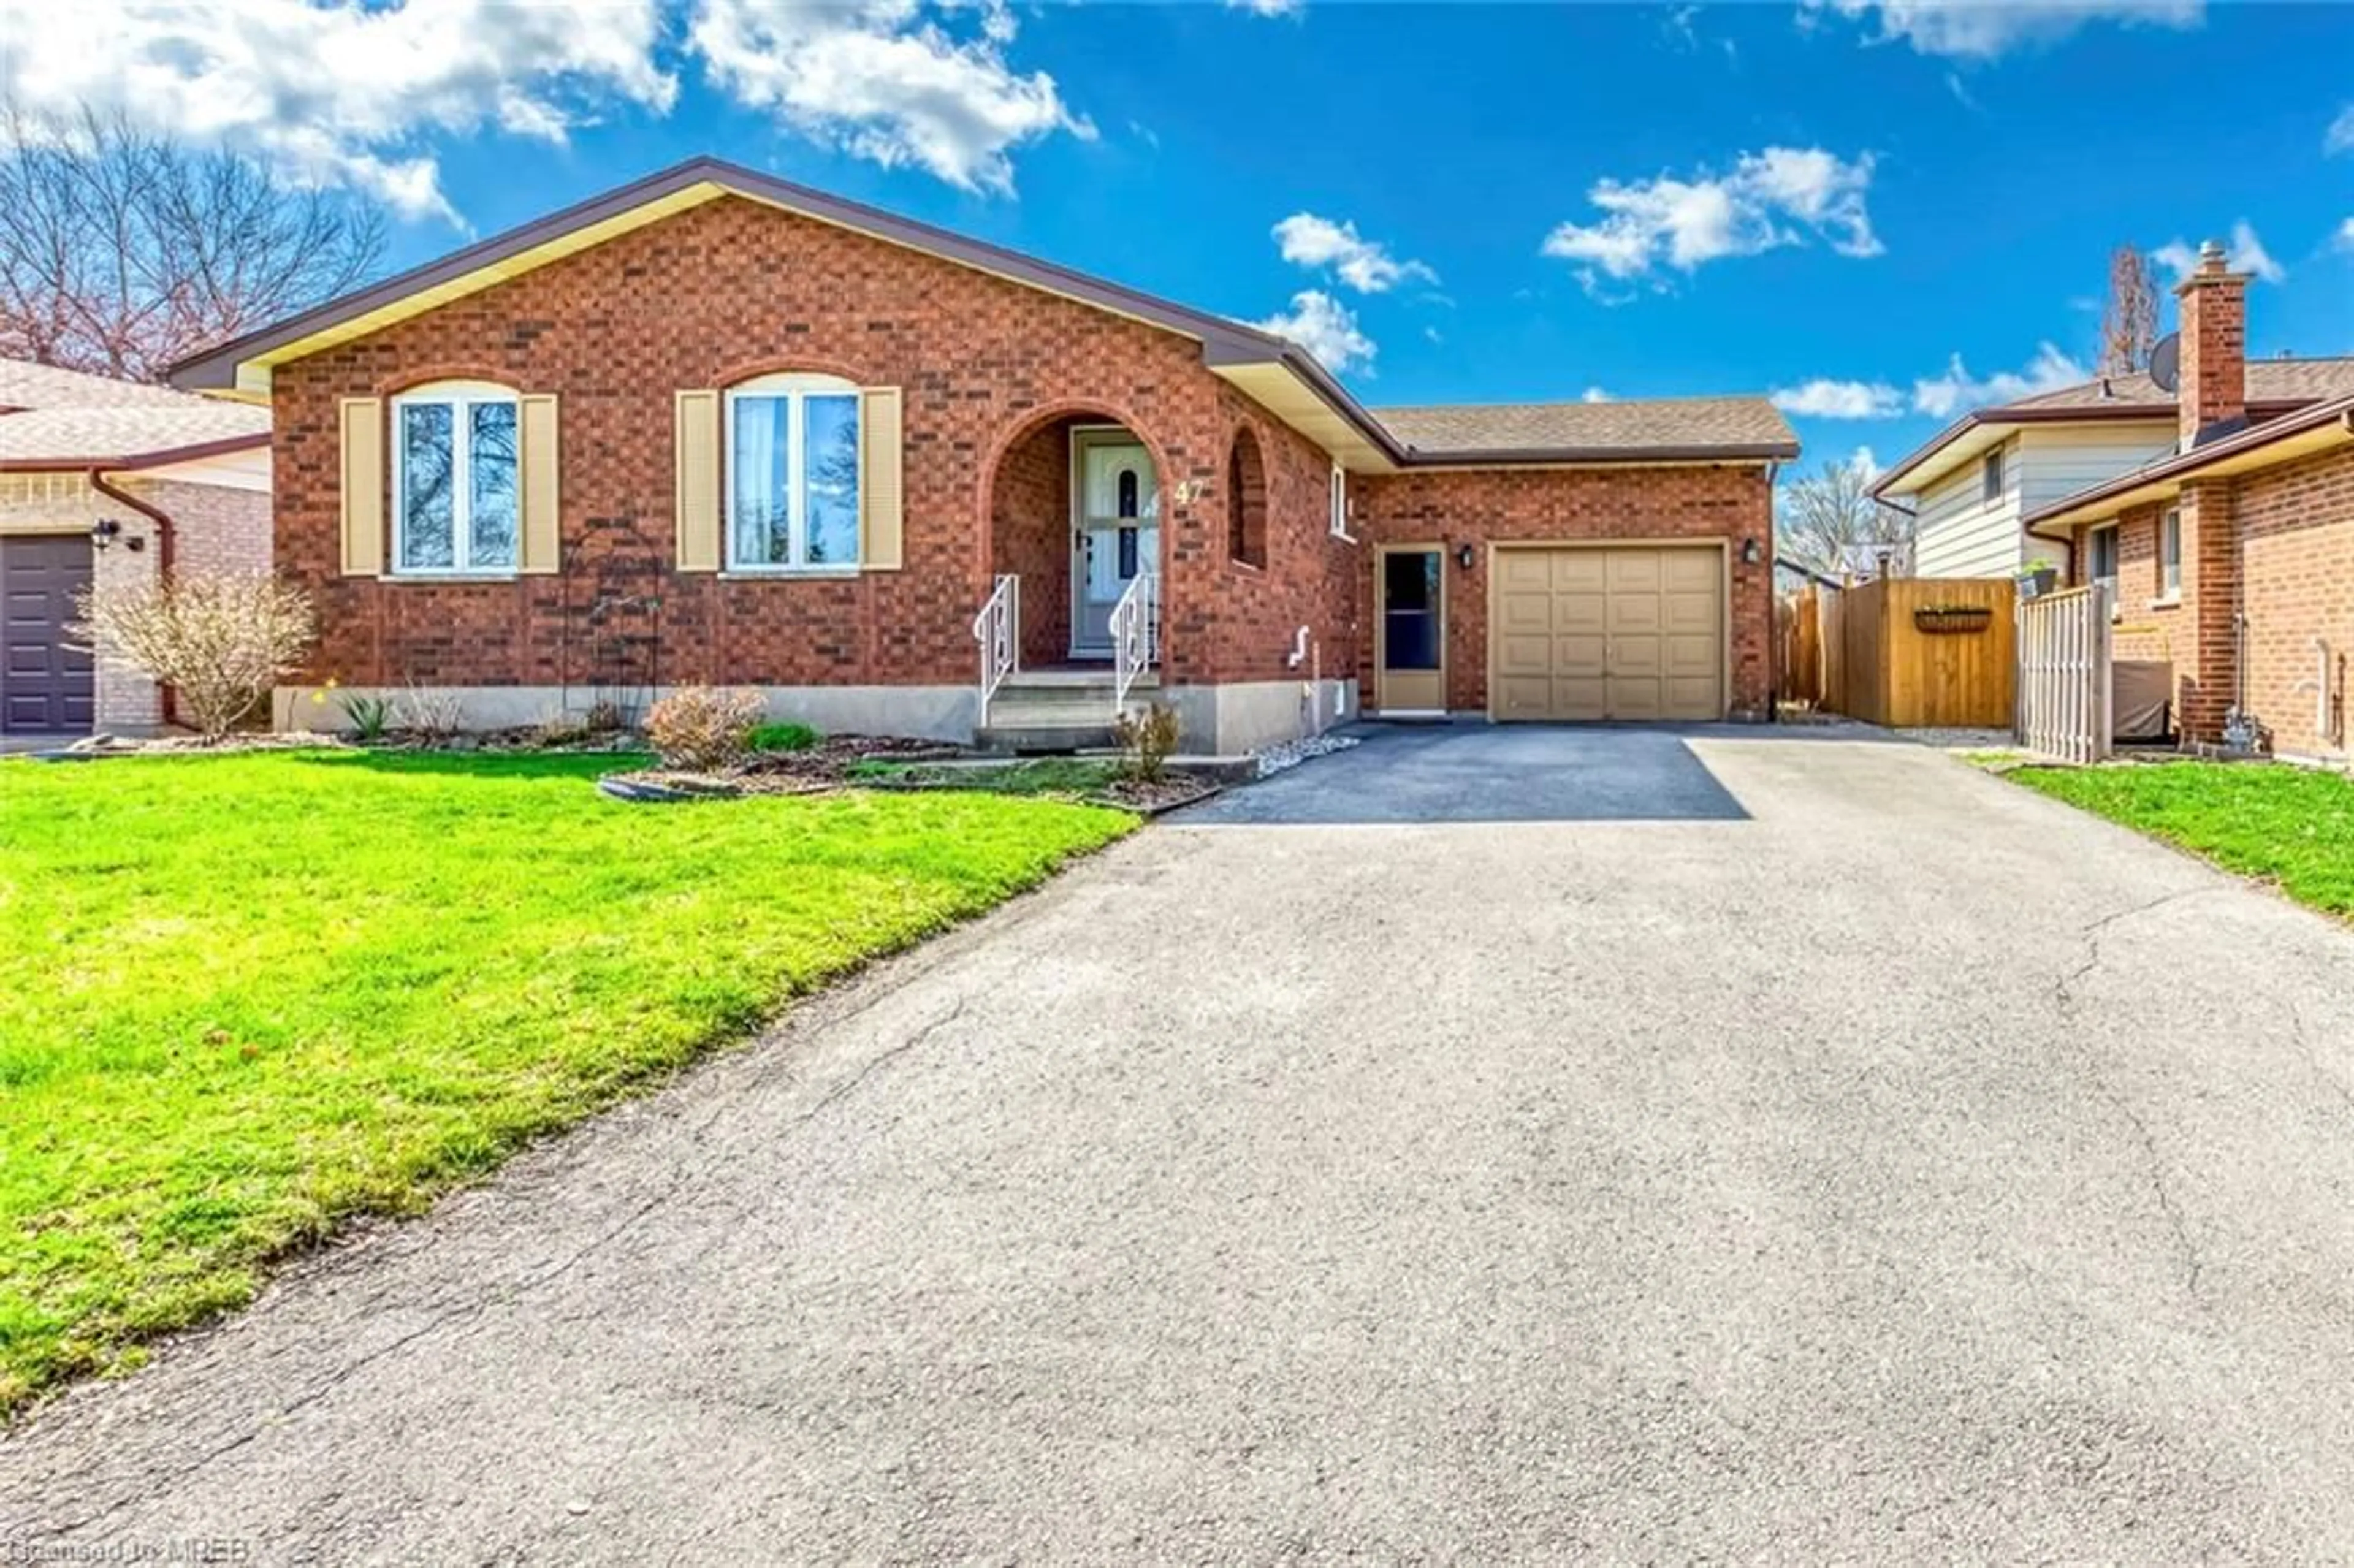 Home with brick exterior material for 47 Page Dr, Welland Ontario L3C 6E2